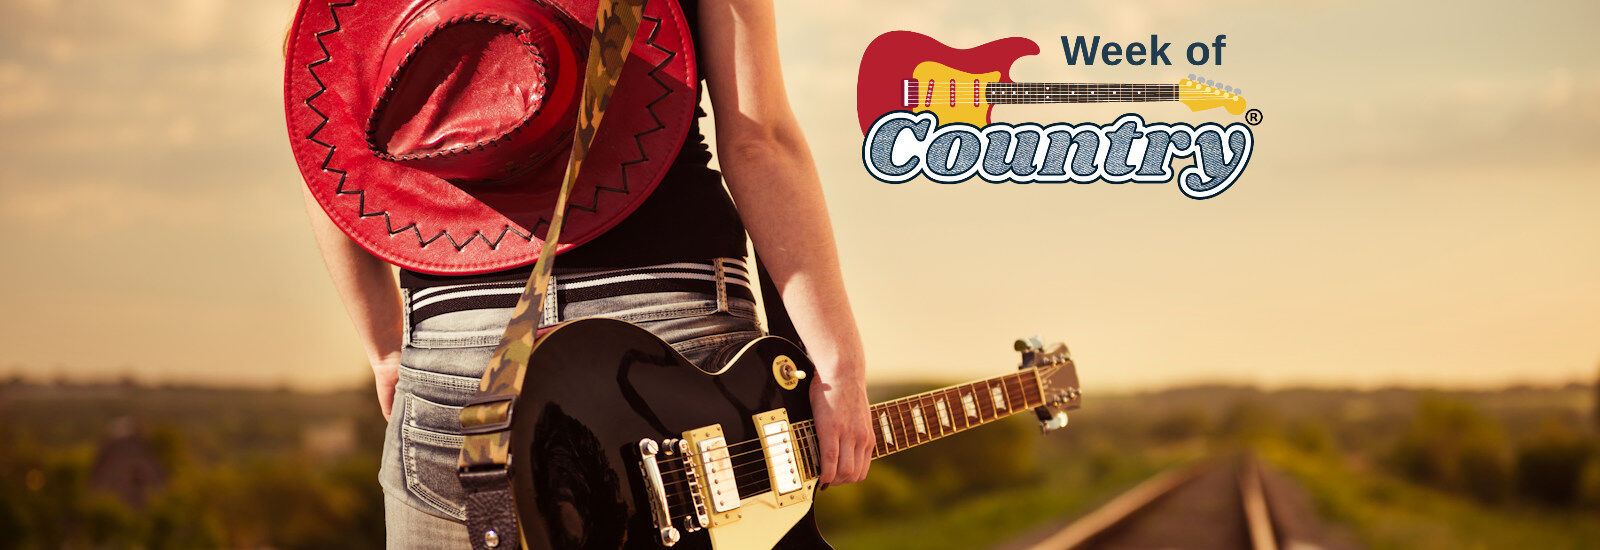 Week Of Country&reg; Music Festival Orlando, Florida.  Woman walking down train tracks with a red cowboy hat and guitar.